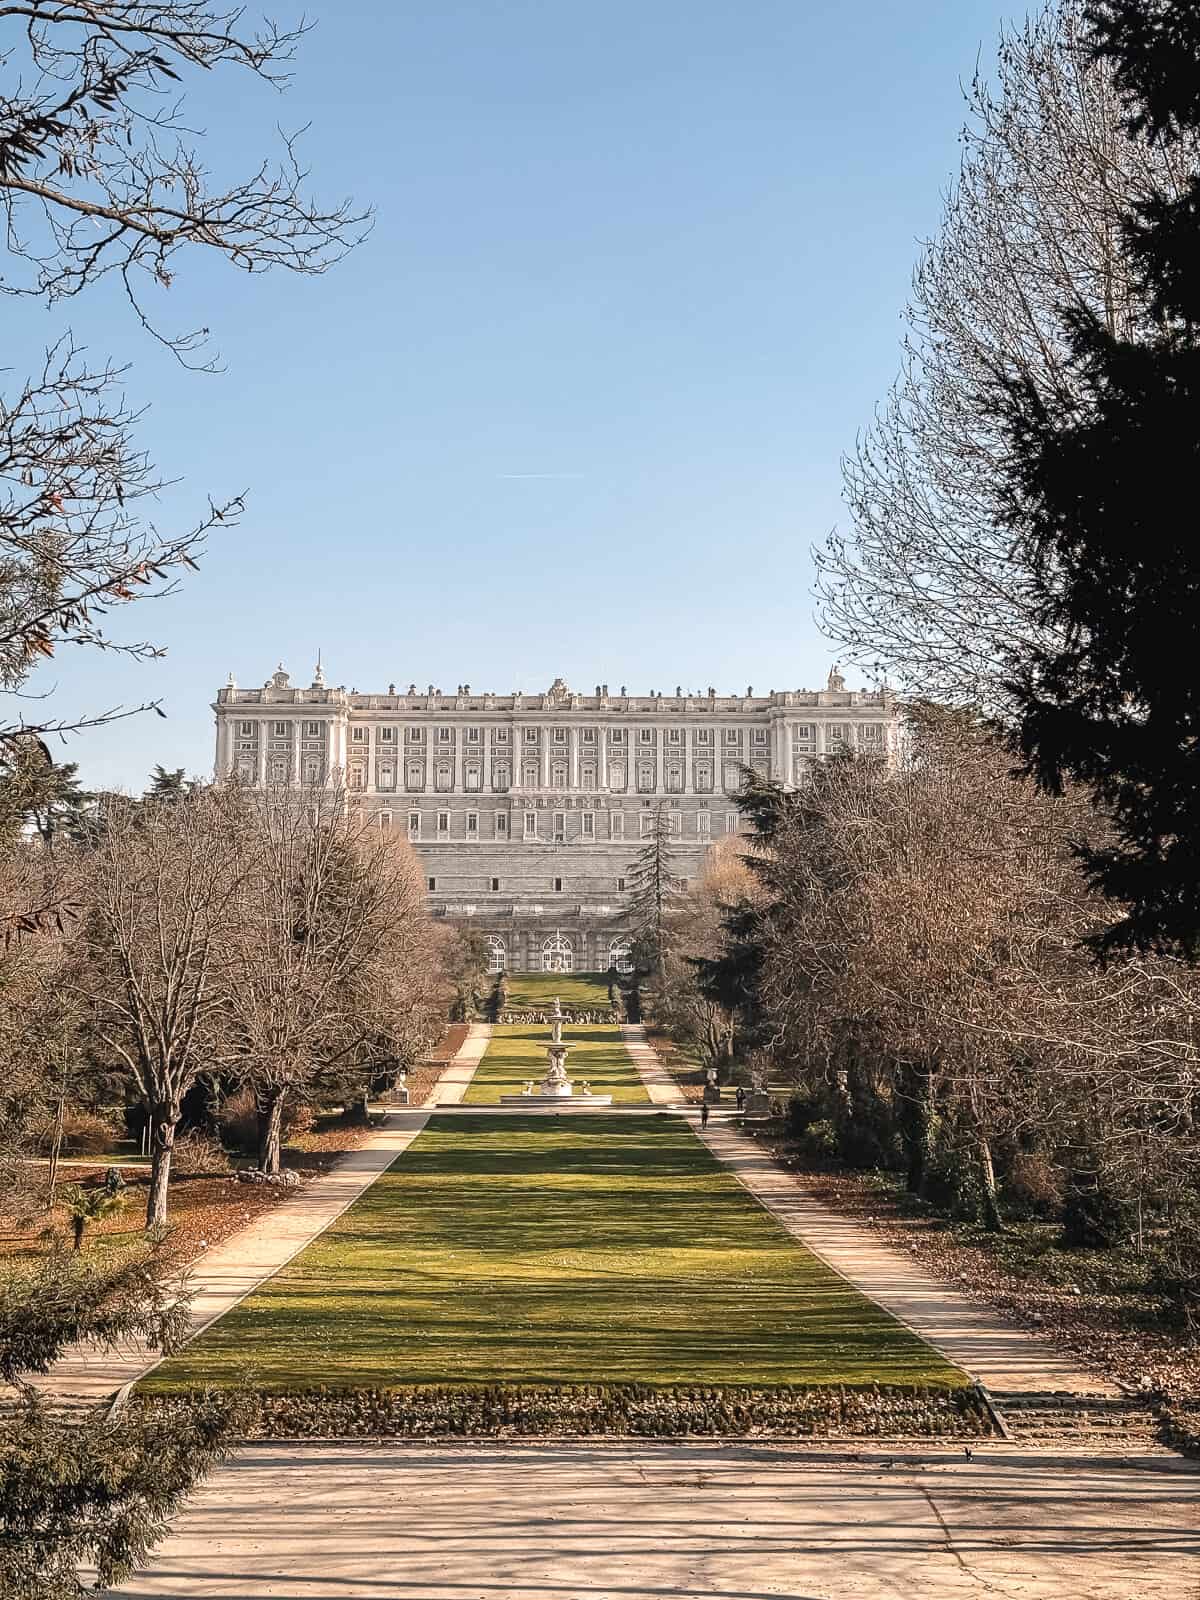 View of the Royal Palace of Madrid from the manicured green gardens of Campo del Moro, with a clear blue sky above, showcasing the expansive size and neoclassical architecture of the historic Spanish residence